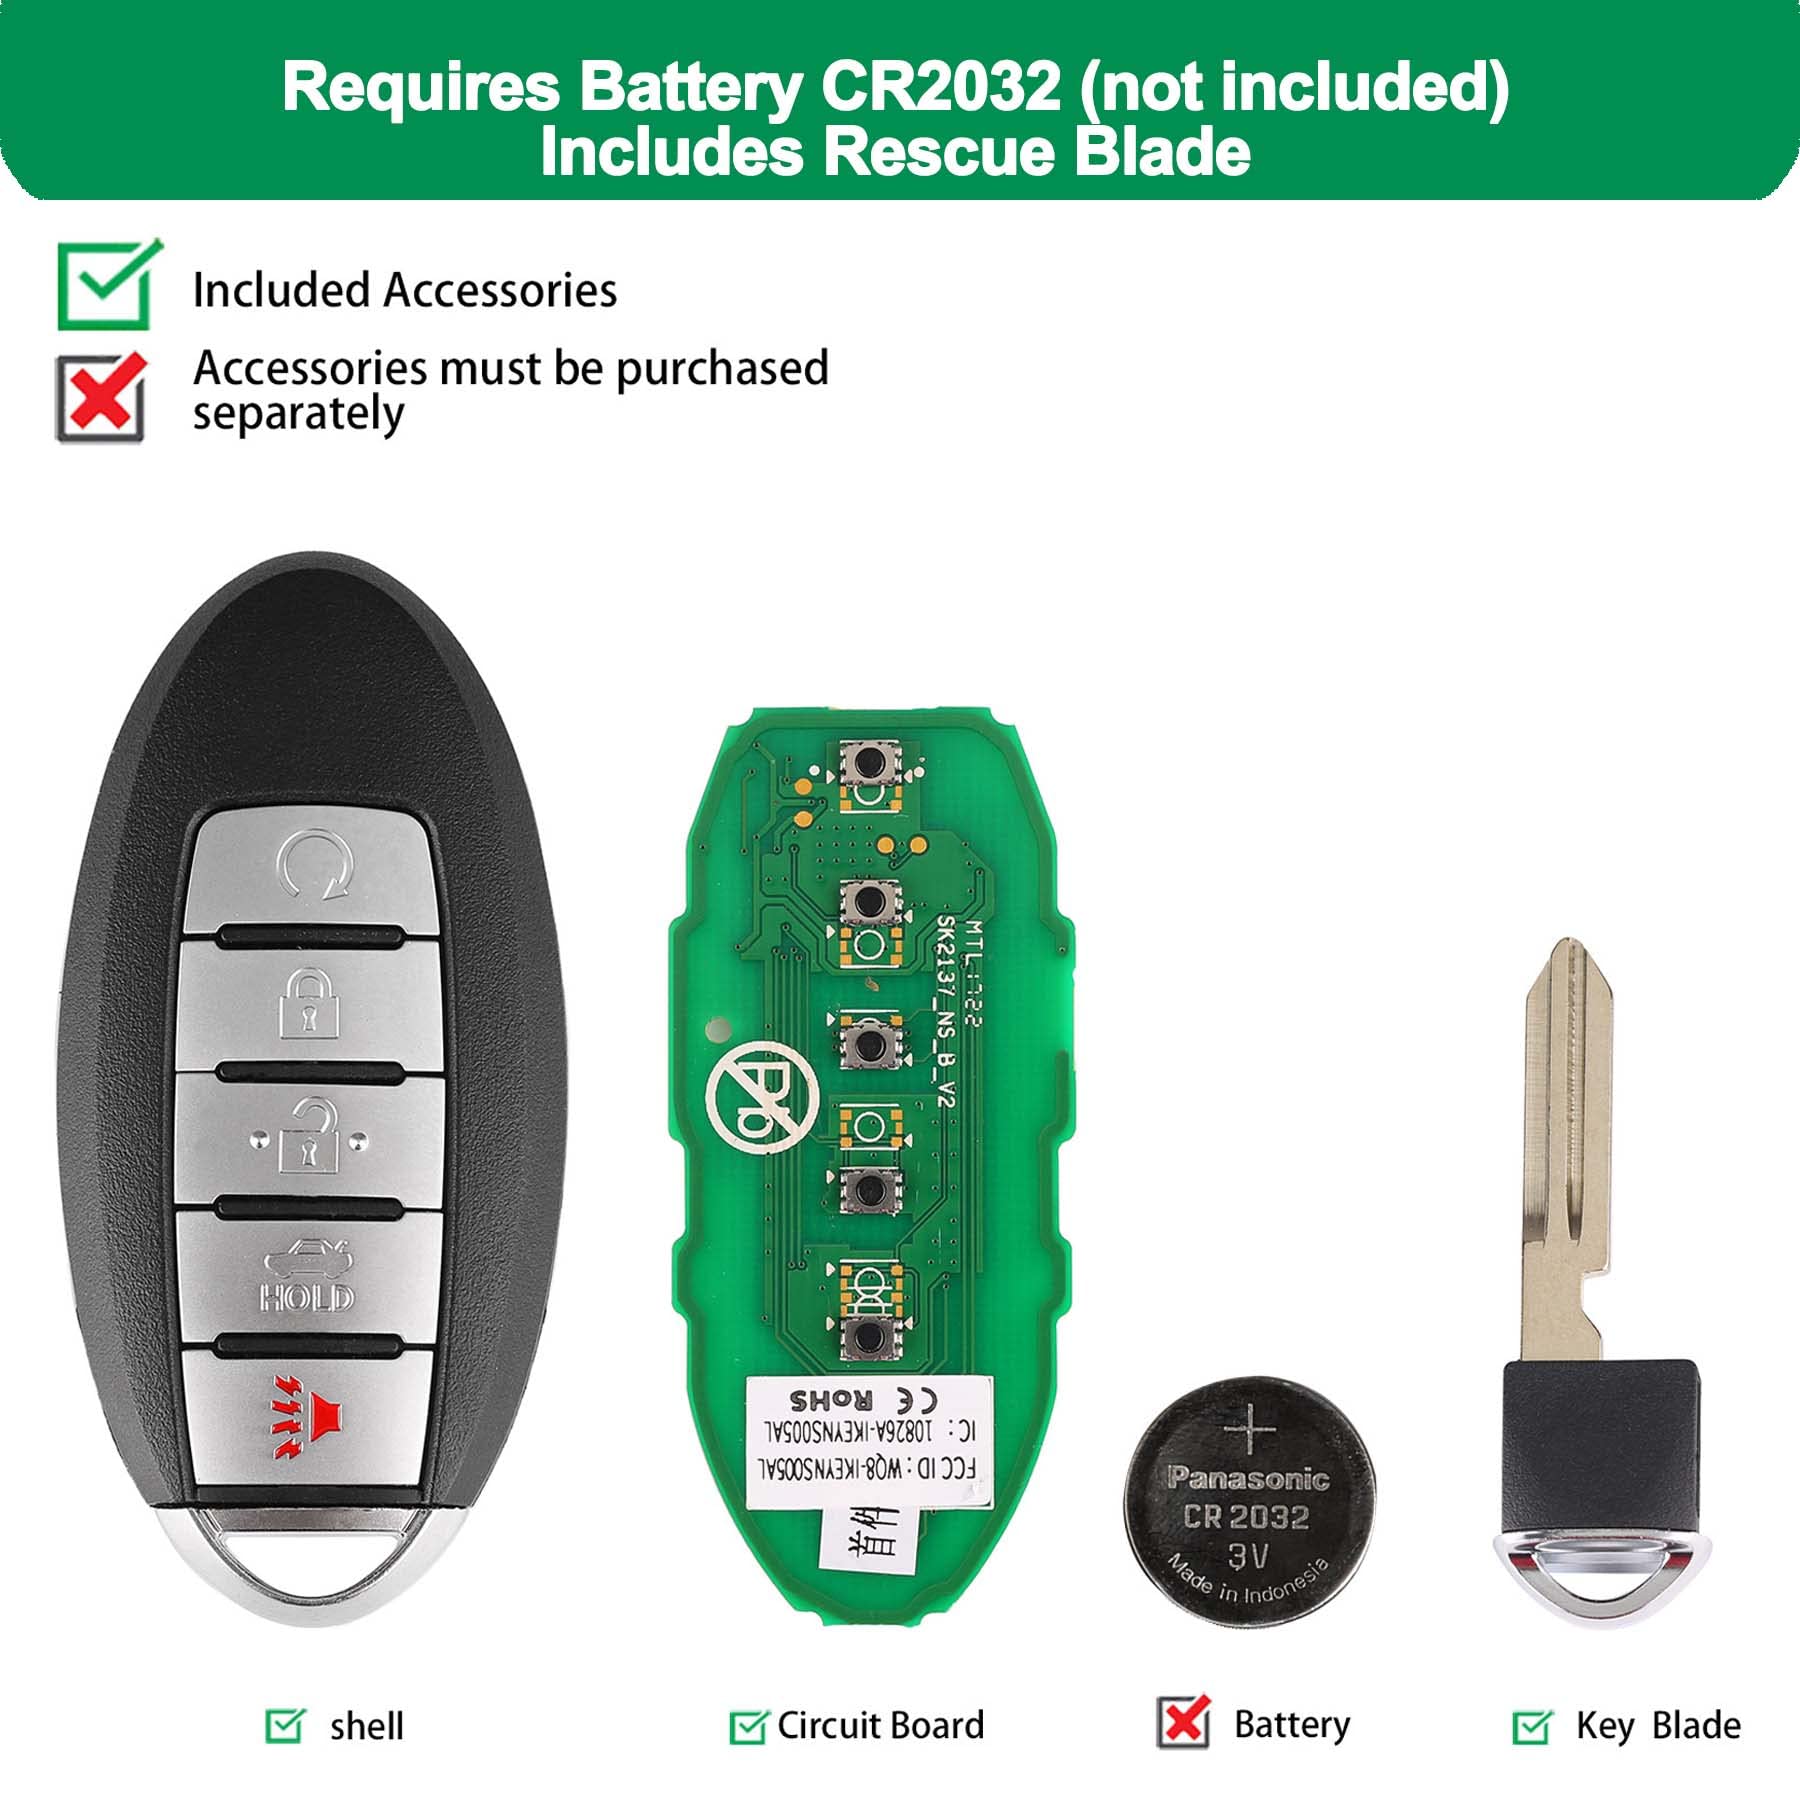 Autel IKEY for Nissan, IKEYNS5TPR, Work with KM100/IM508/IM608, Programmable Key Fob, OE Quality Smart Key Replacement, Key Creation/Clone, Chip Read/Write, 315M/415M, 5 Buttons, Ultra-Long Range